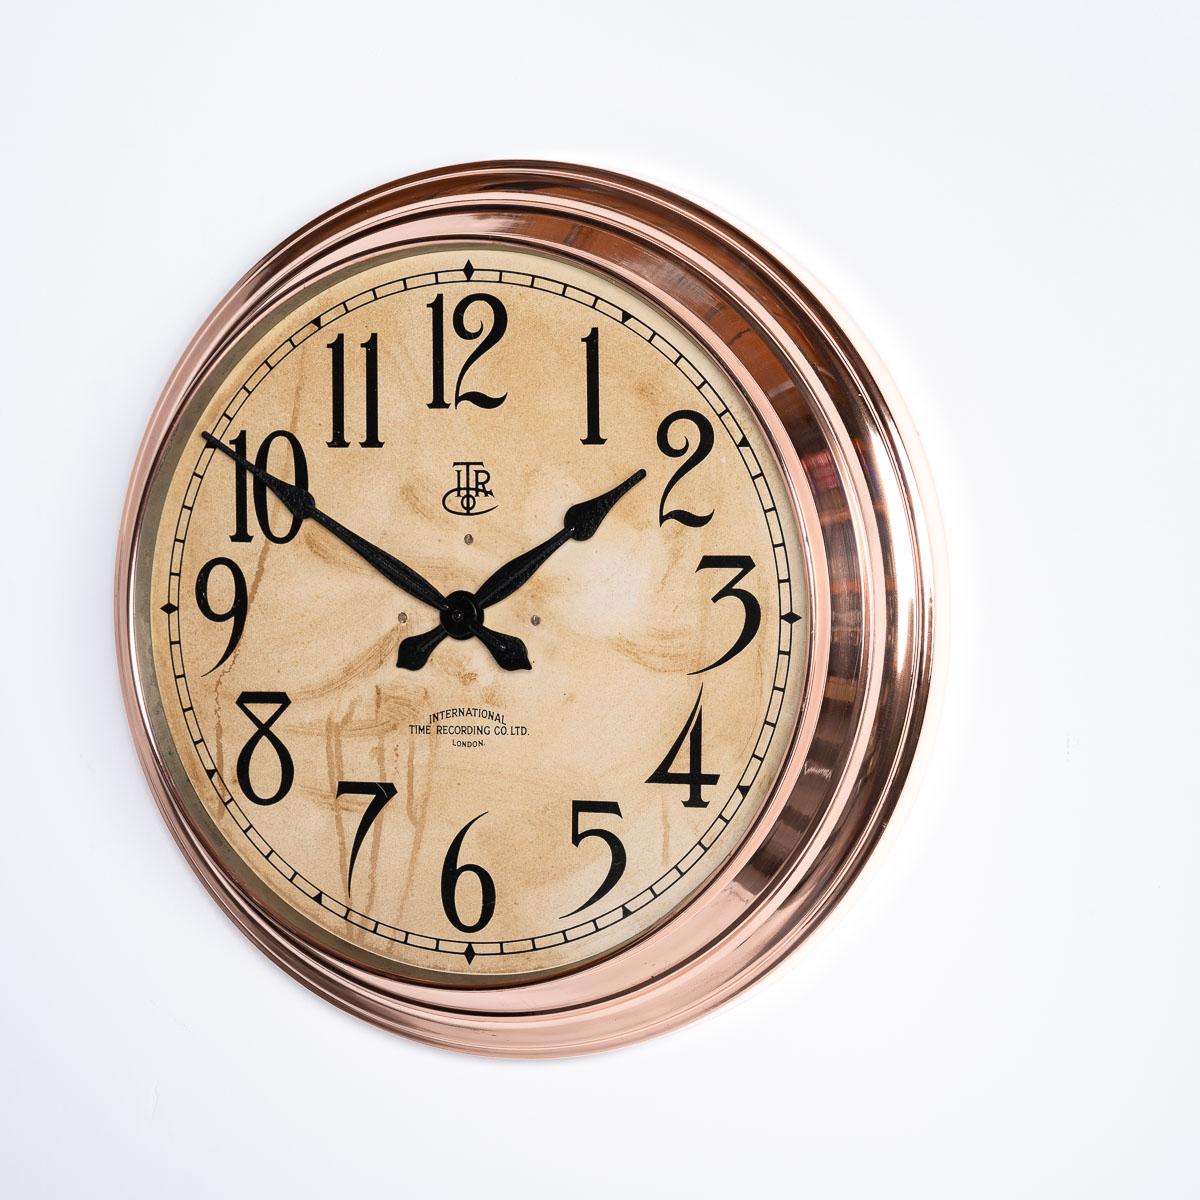 A beautiful and rare example from clock makers International Time Recording Co Ltd circa 1930.

This copper cased industrial clock was originally housed in a boot factory in Leicester, England and was removed by a worker when the factory closed in